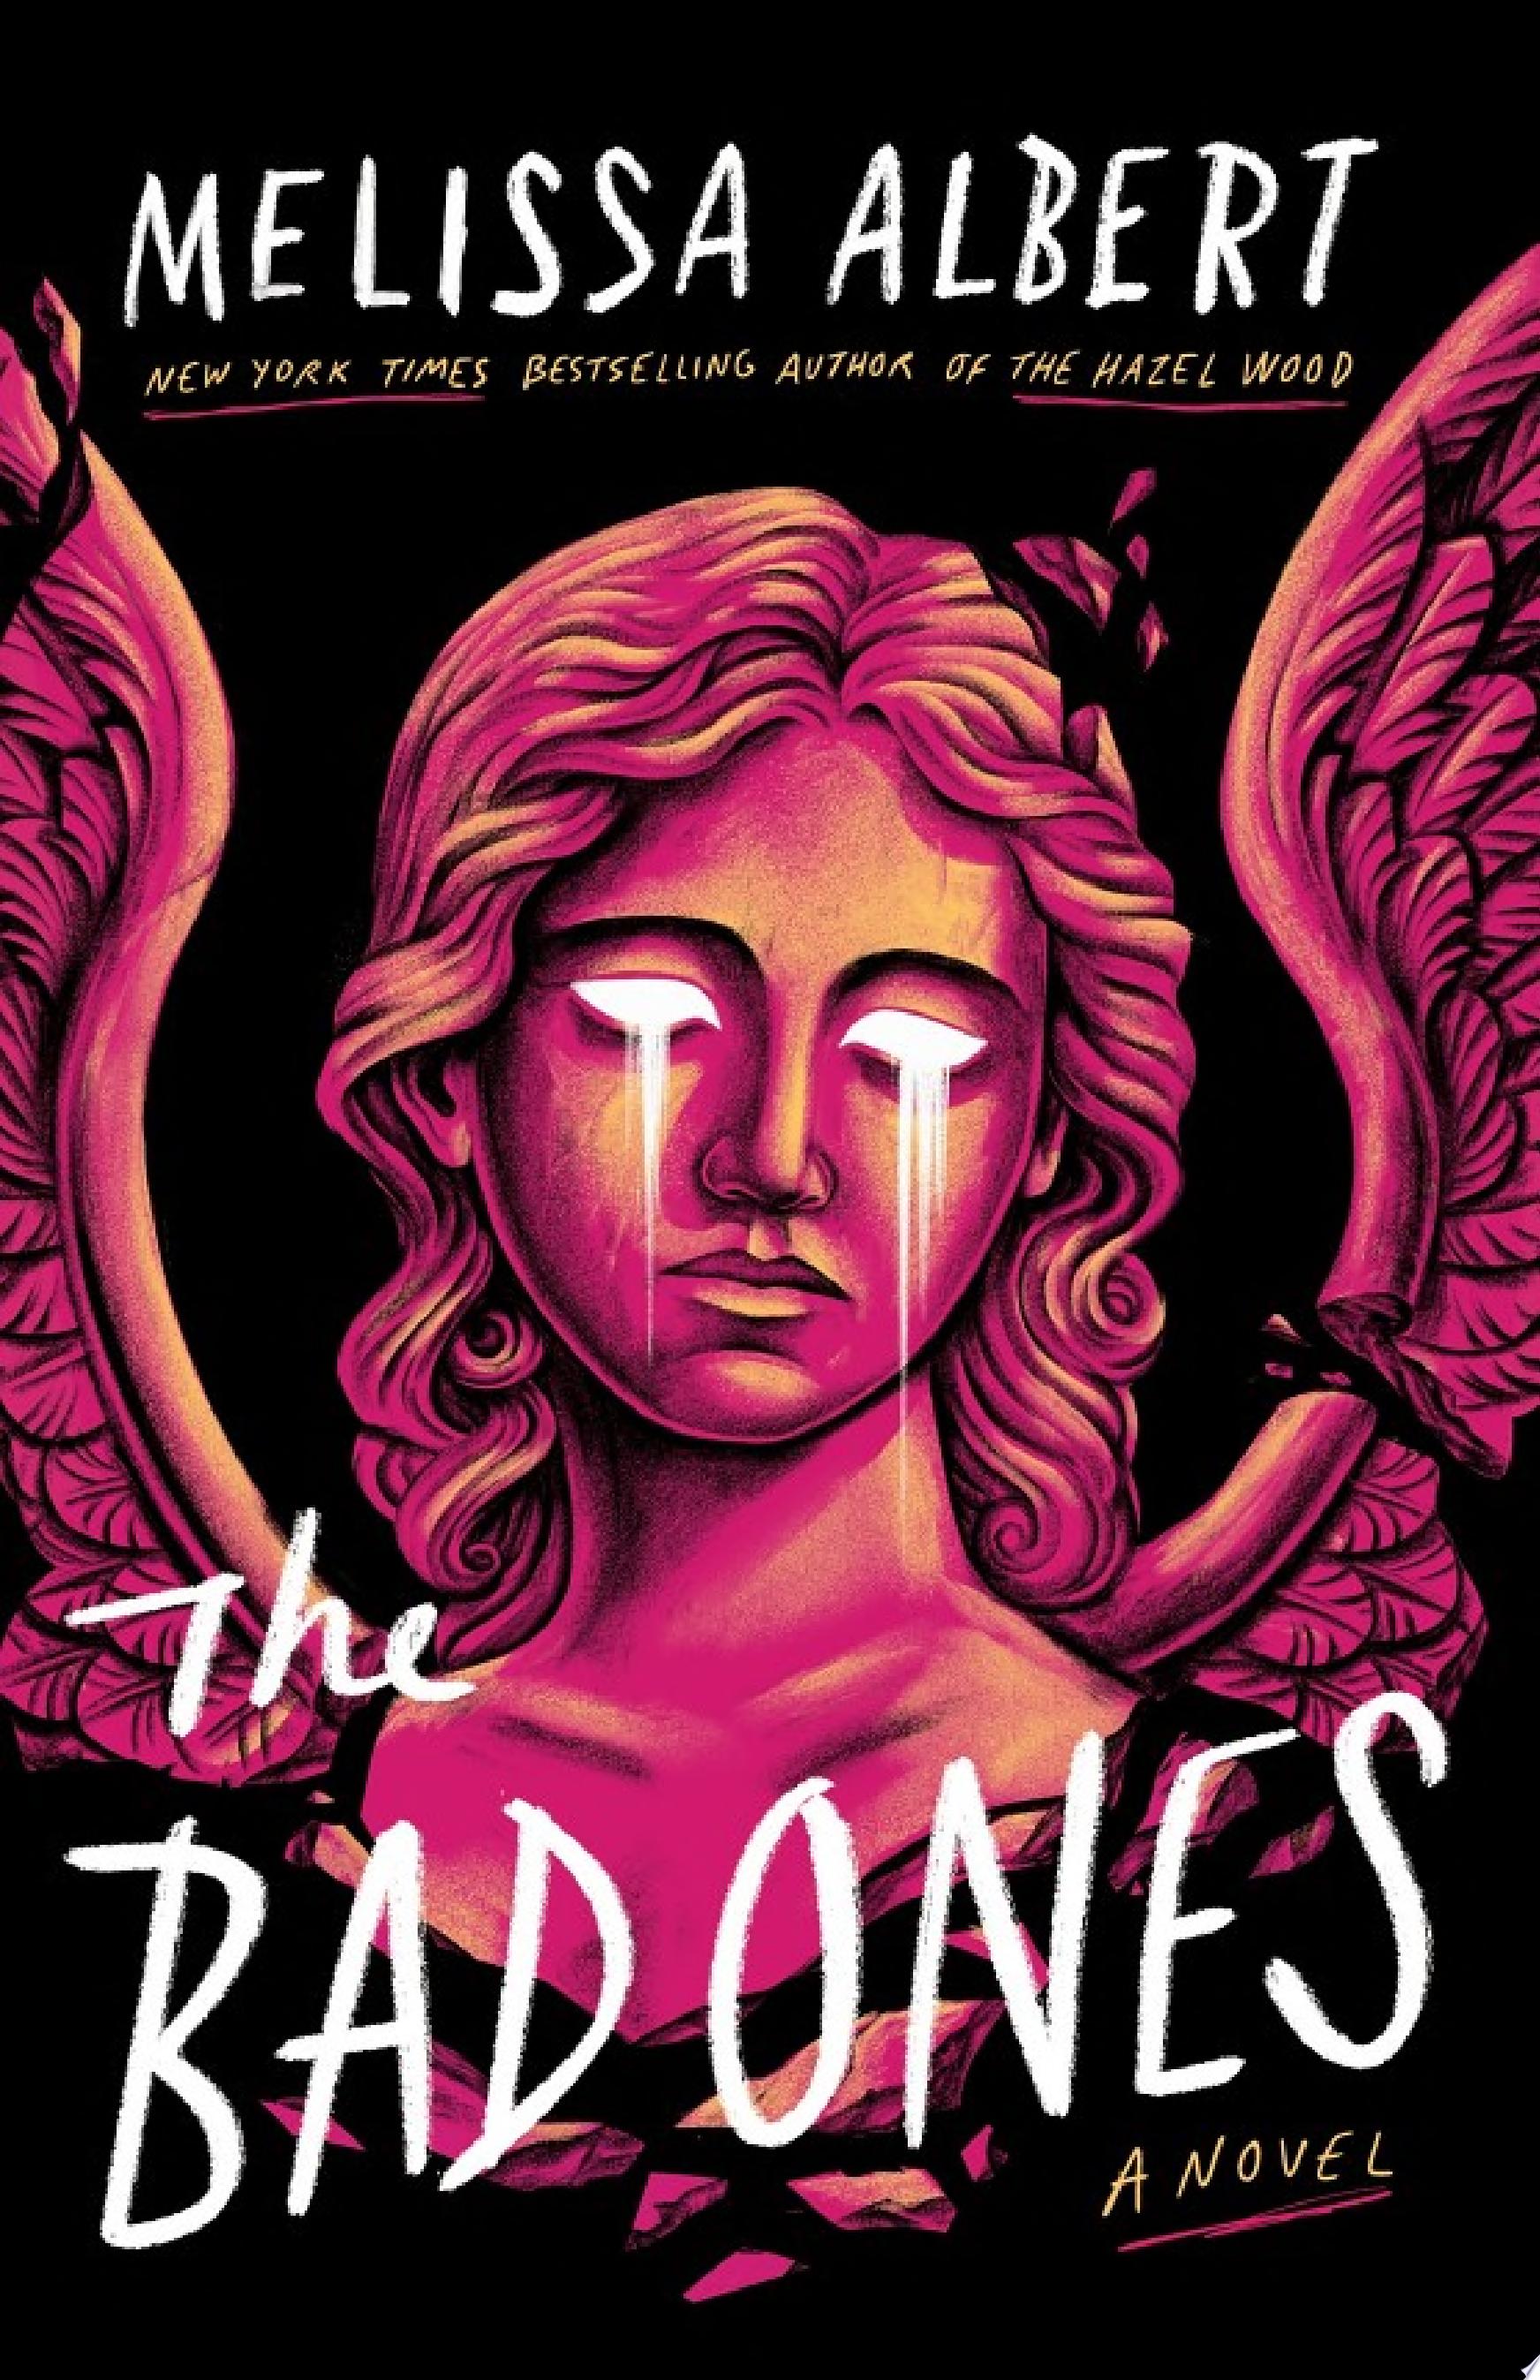 Image for "The Bad Ones"